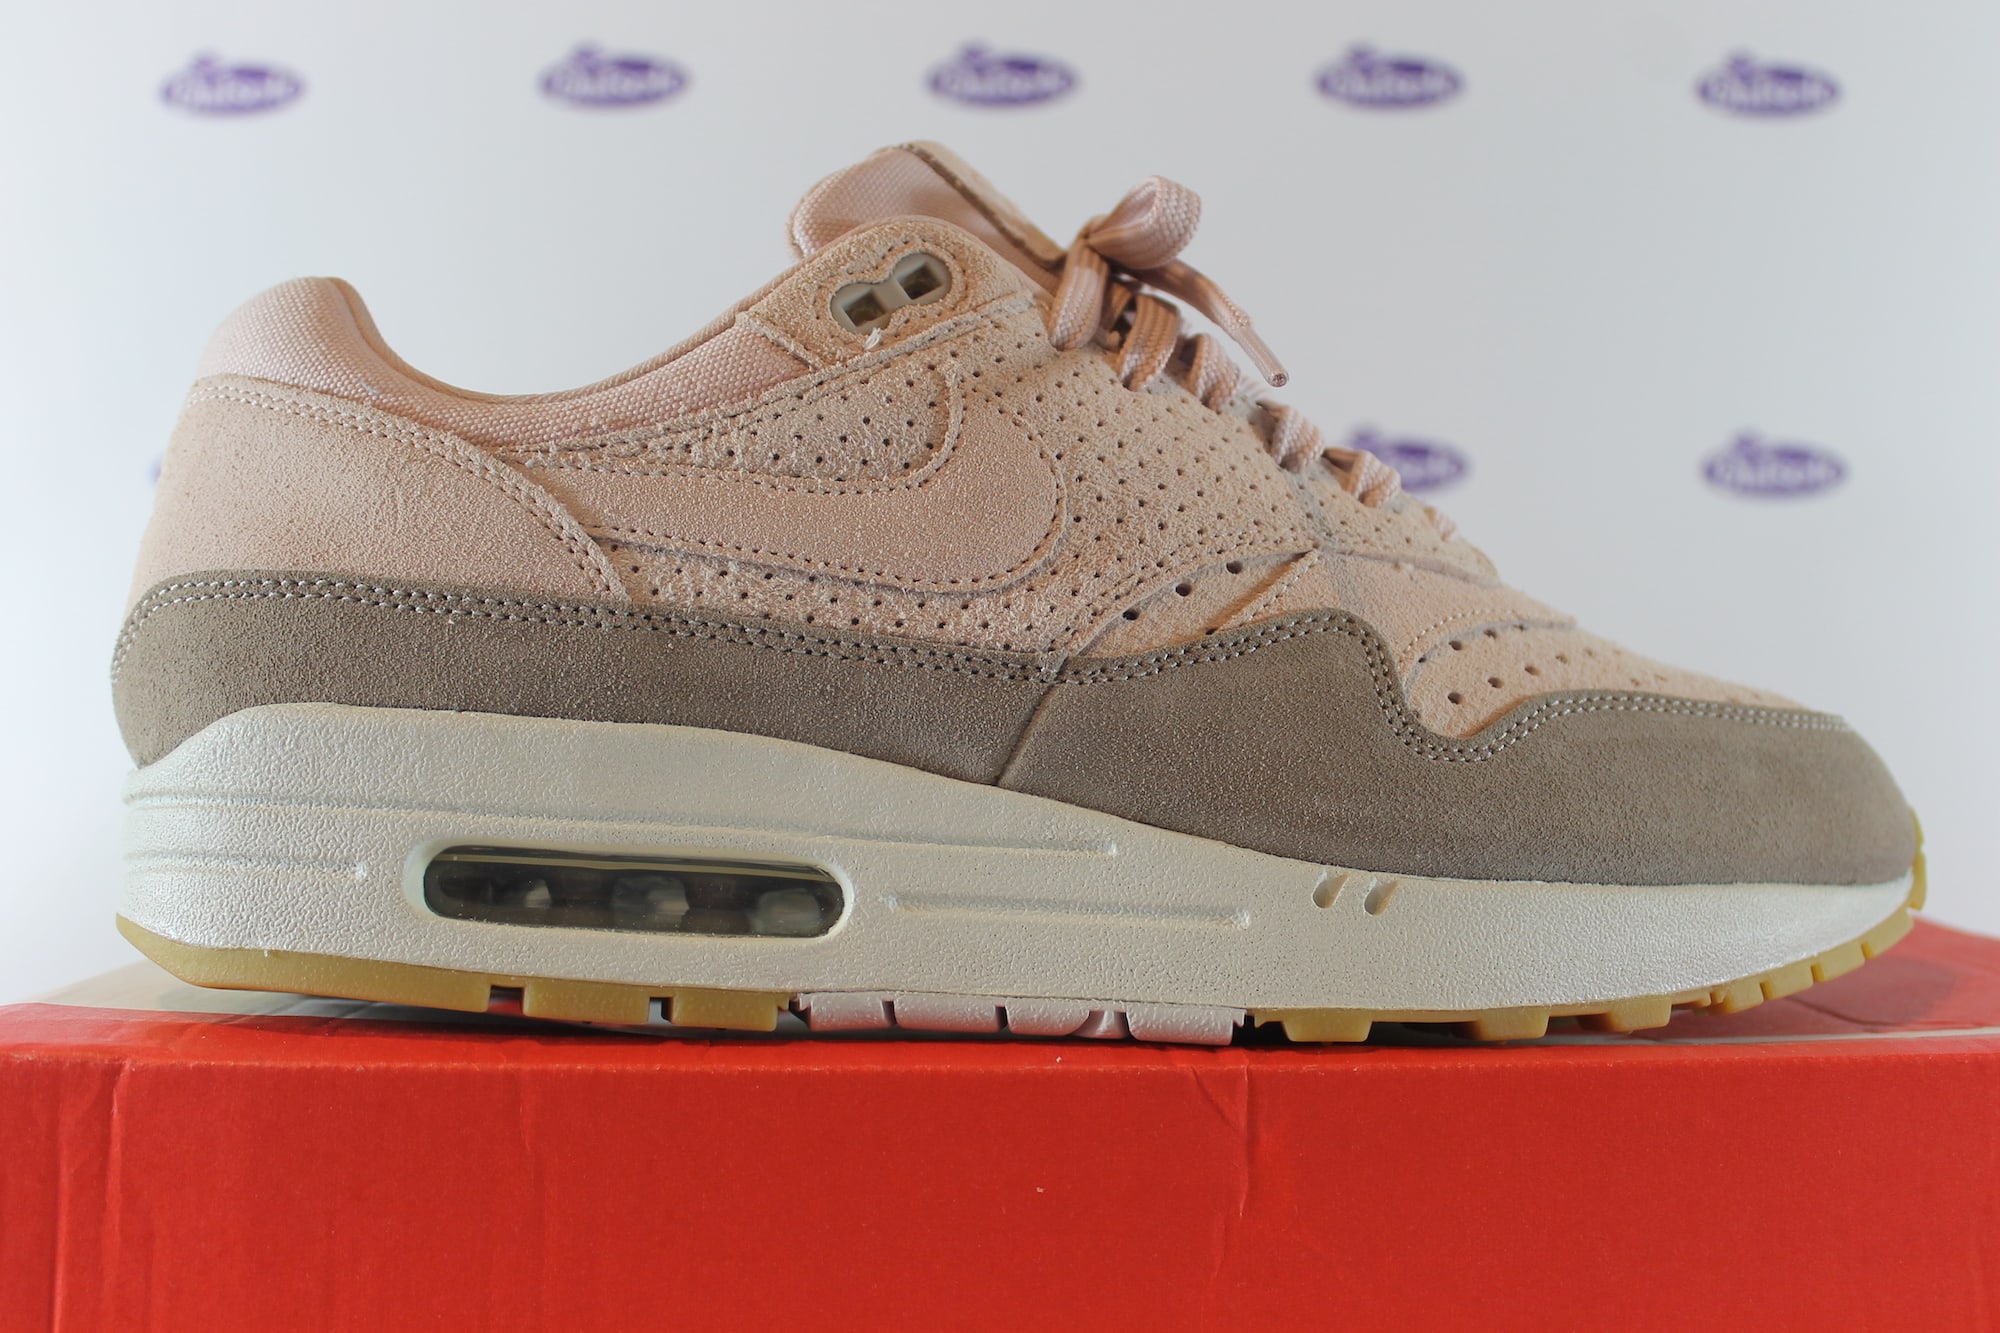 Escarchado Humanista tetraedro Nike Air Max 1 Premium Particle Beige • ✓ In stock at Outsole